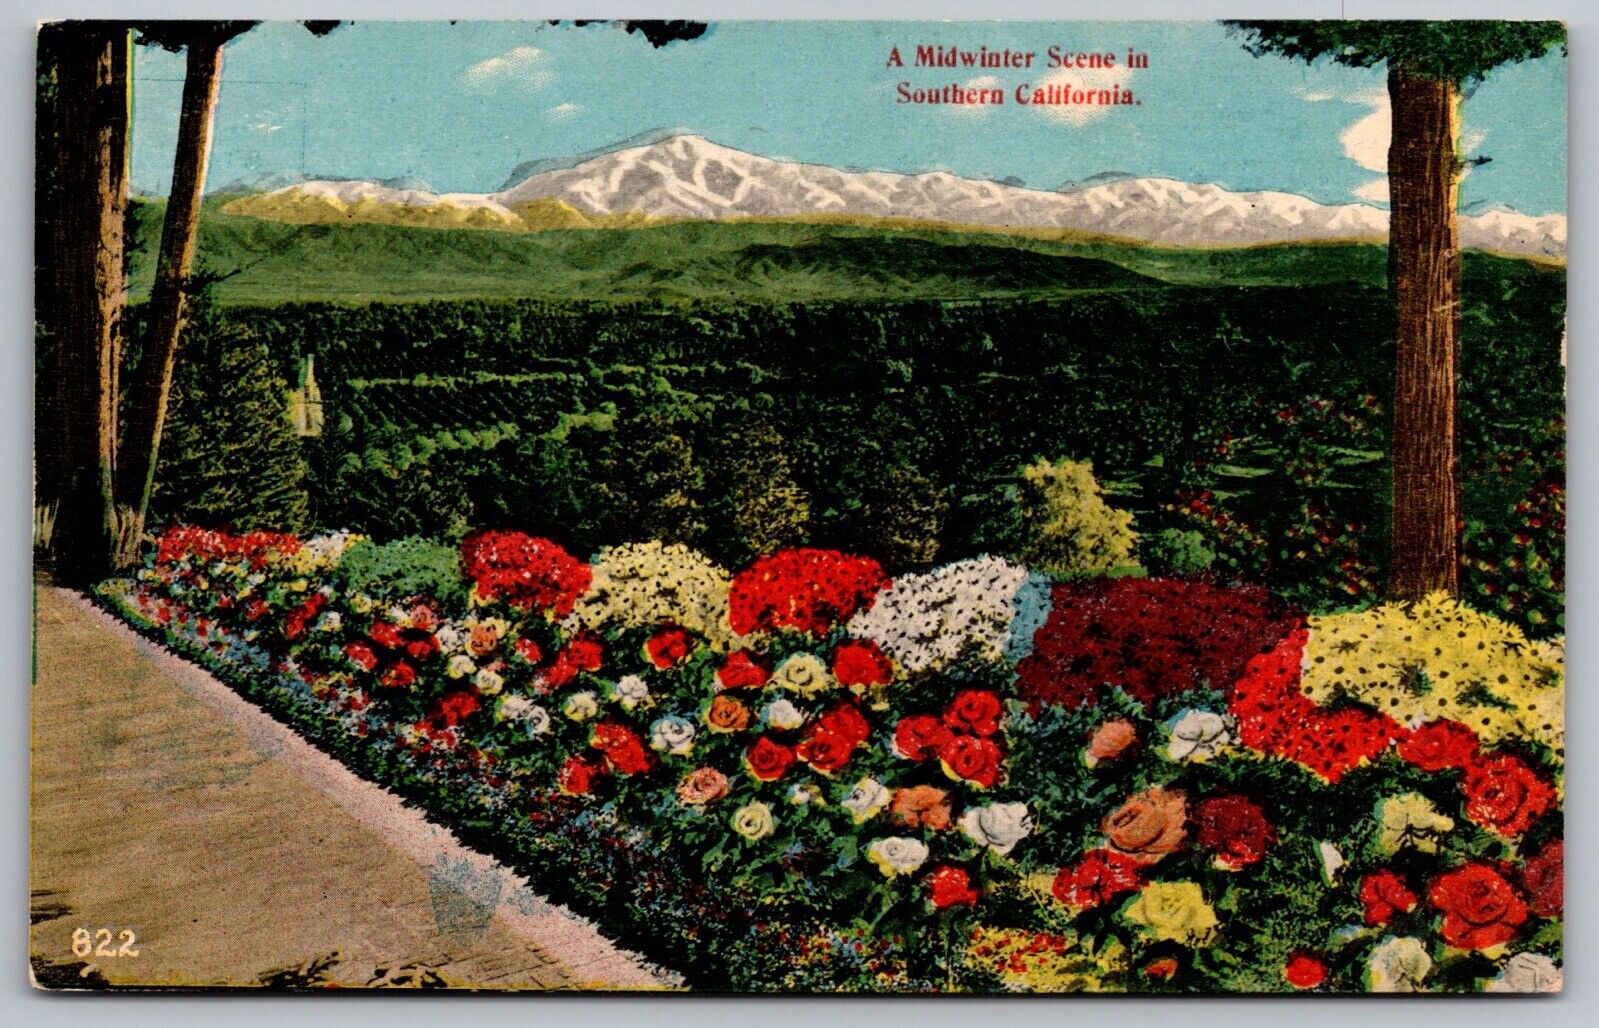 California Southern Midwinter Snowcapped Mountains Forest Flowers VTG Postcard